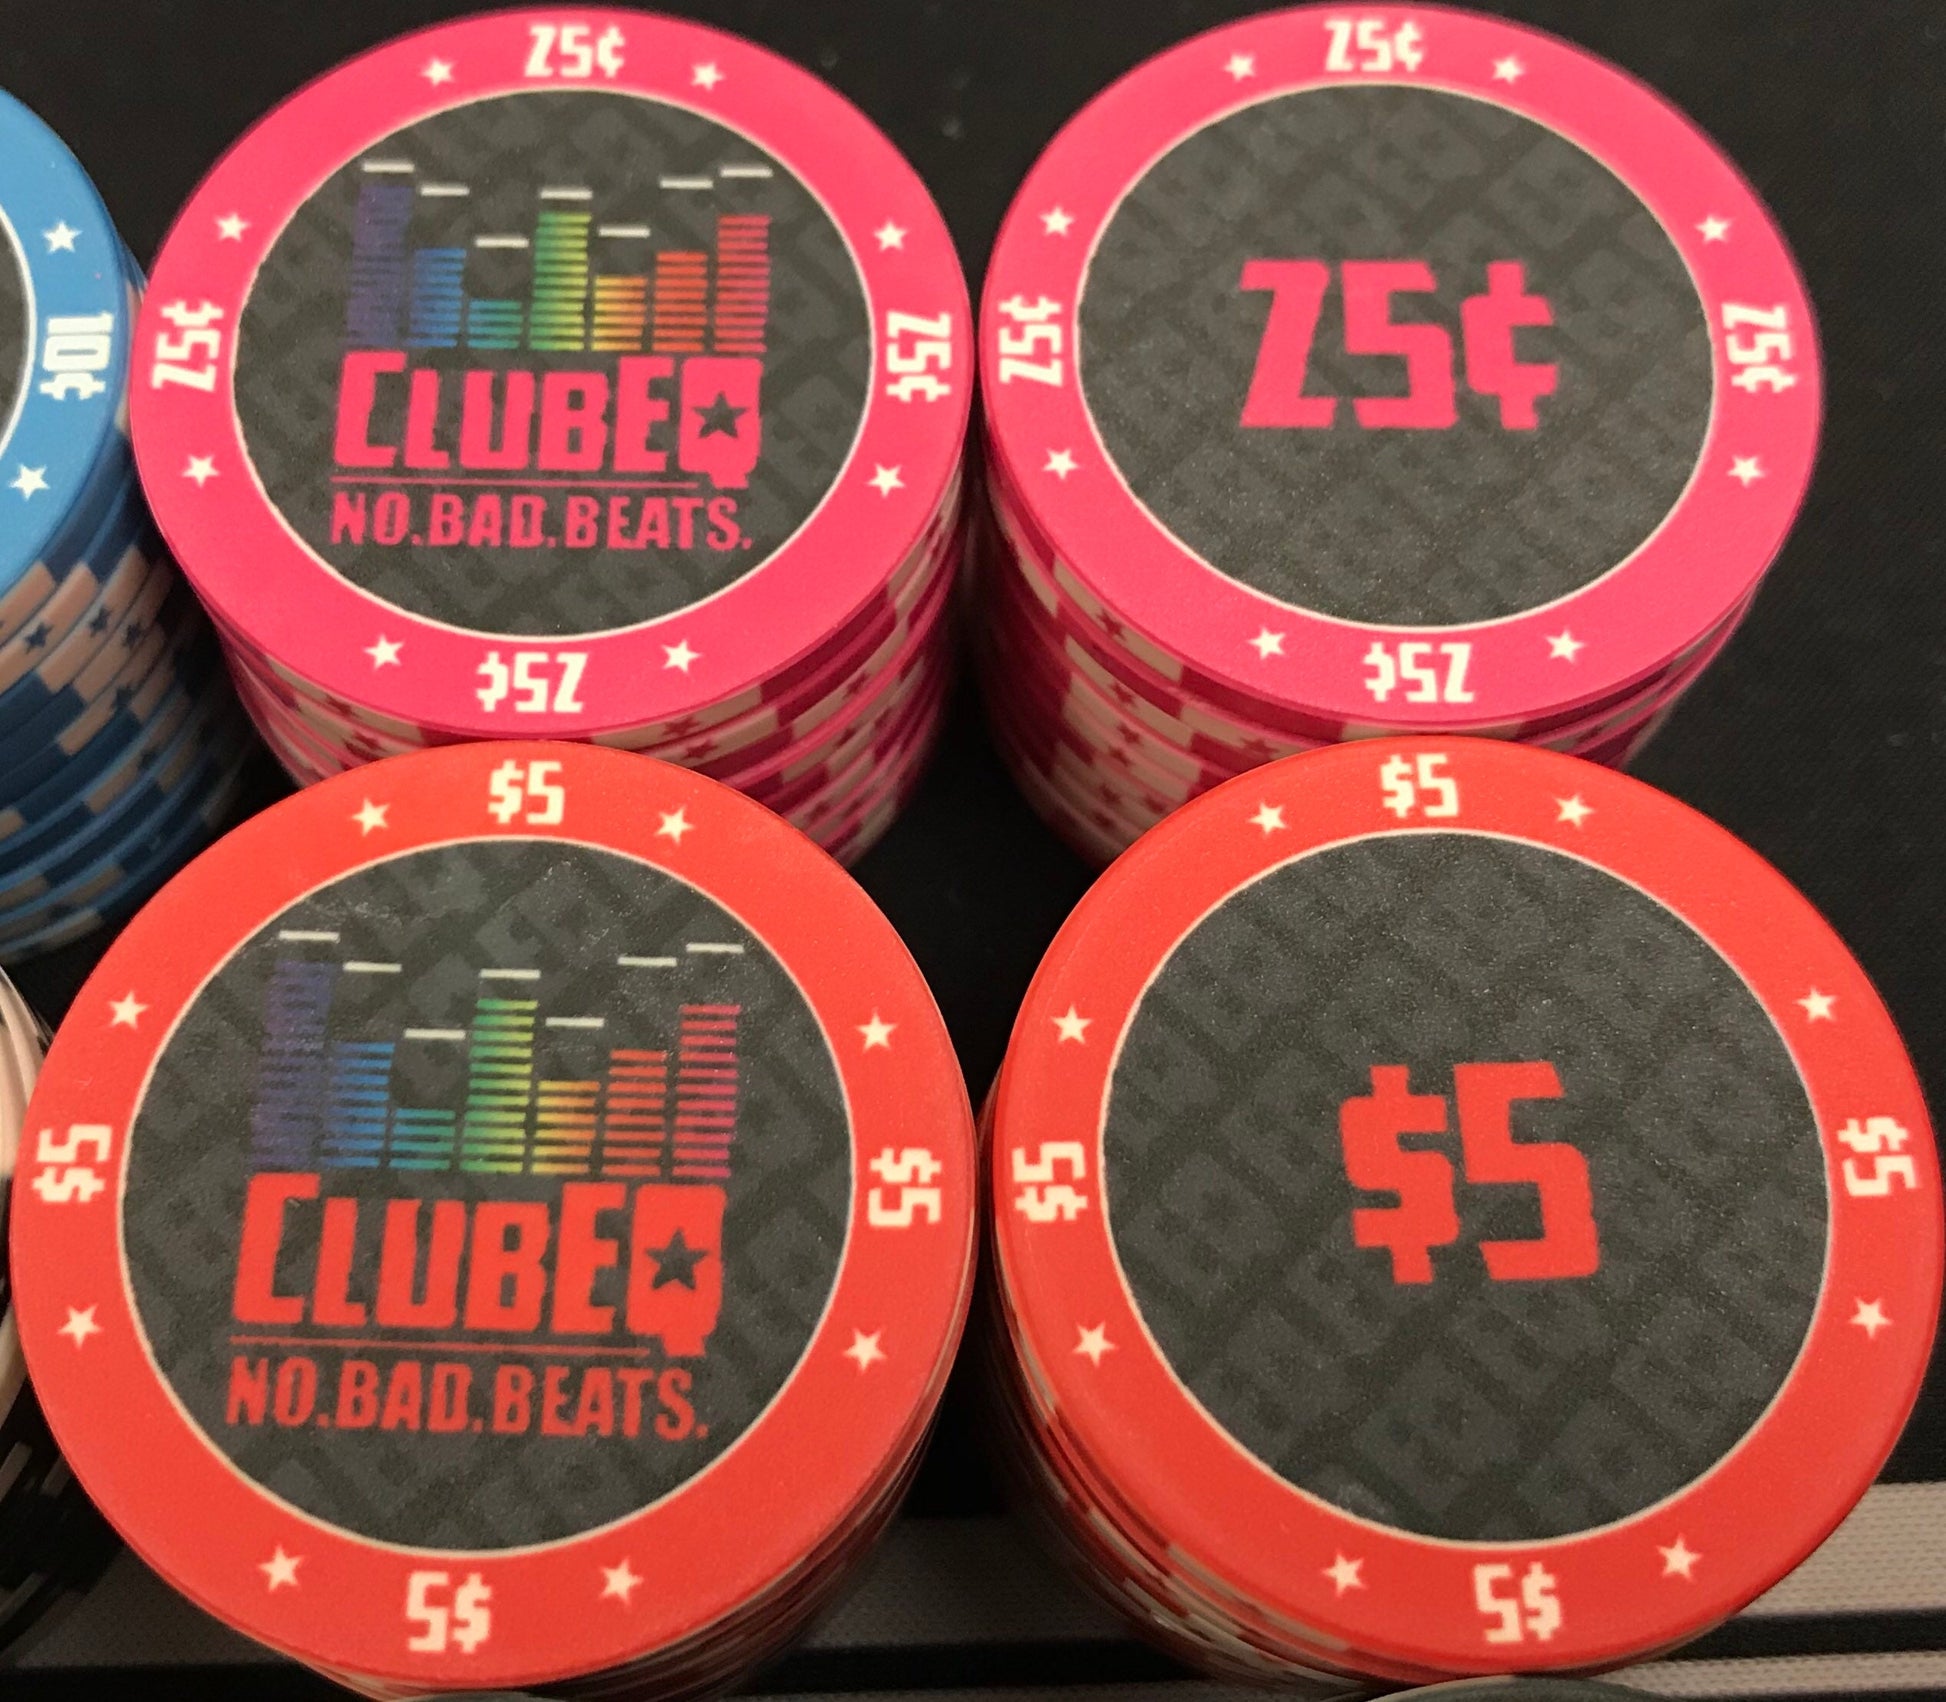 Here we see the twenty-five cent (25¢) and five dollar ($5) ClubEQ poker chips in magenta (pink) and red, respectively. The ClubEQ logo resembles a lighted EQ band. On the other side of each chip is the denomination in the same color as the poker chip.